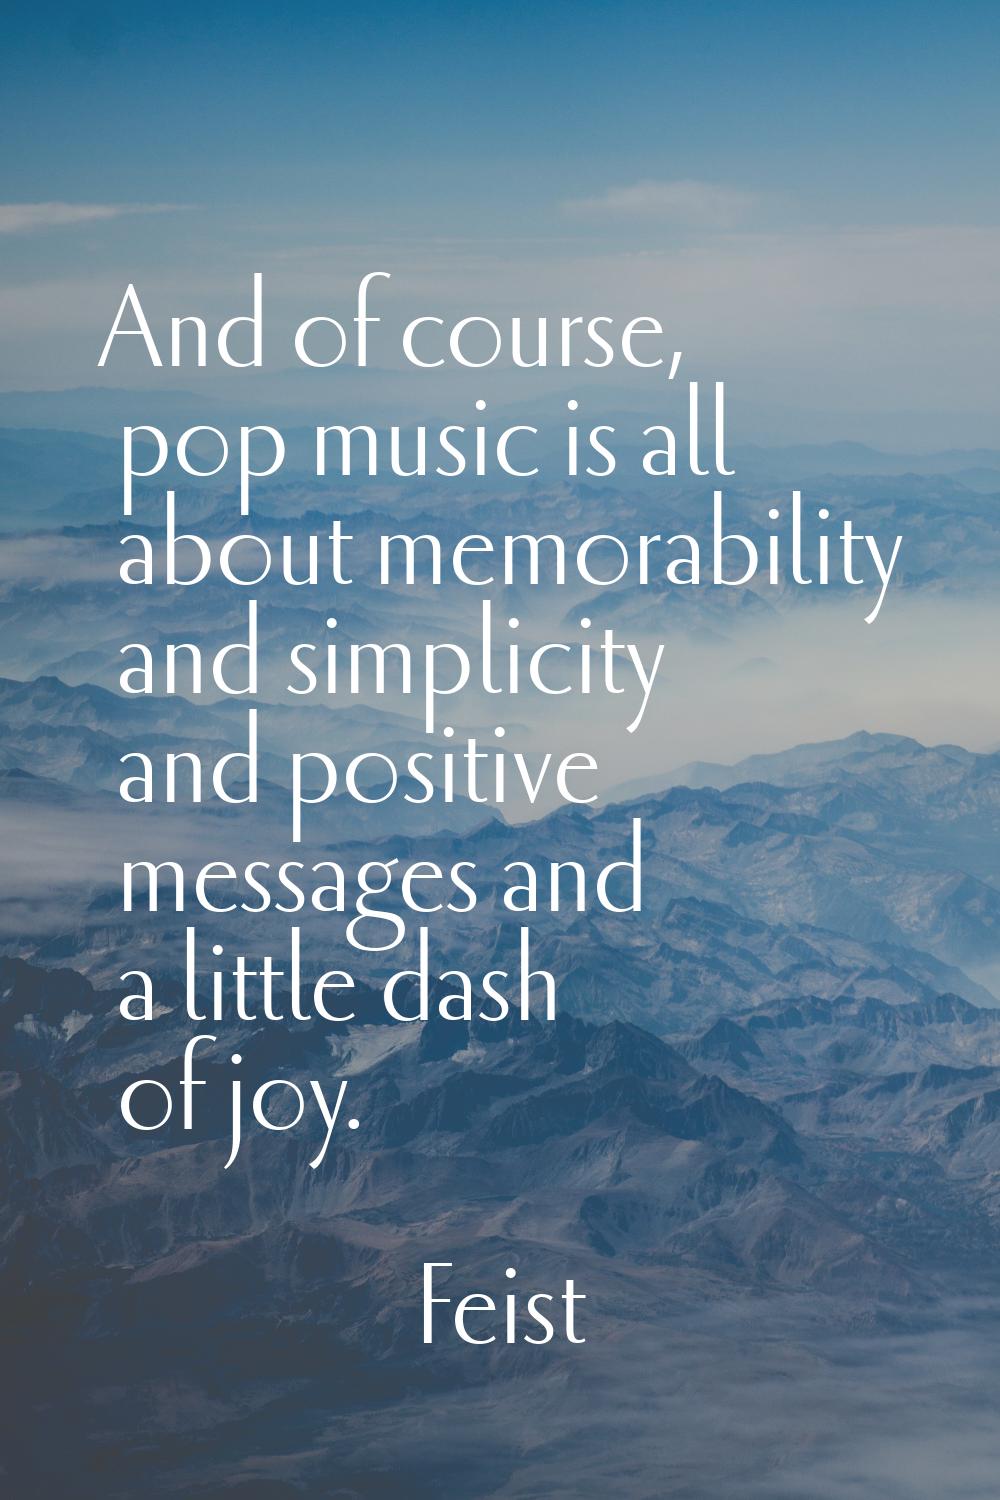 And of course, pop music is all about memorability and simplicity and positive messages and a littl